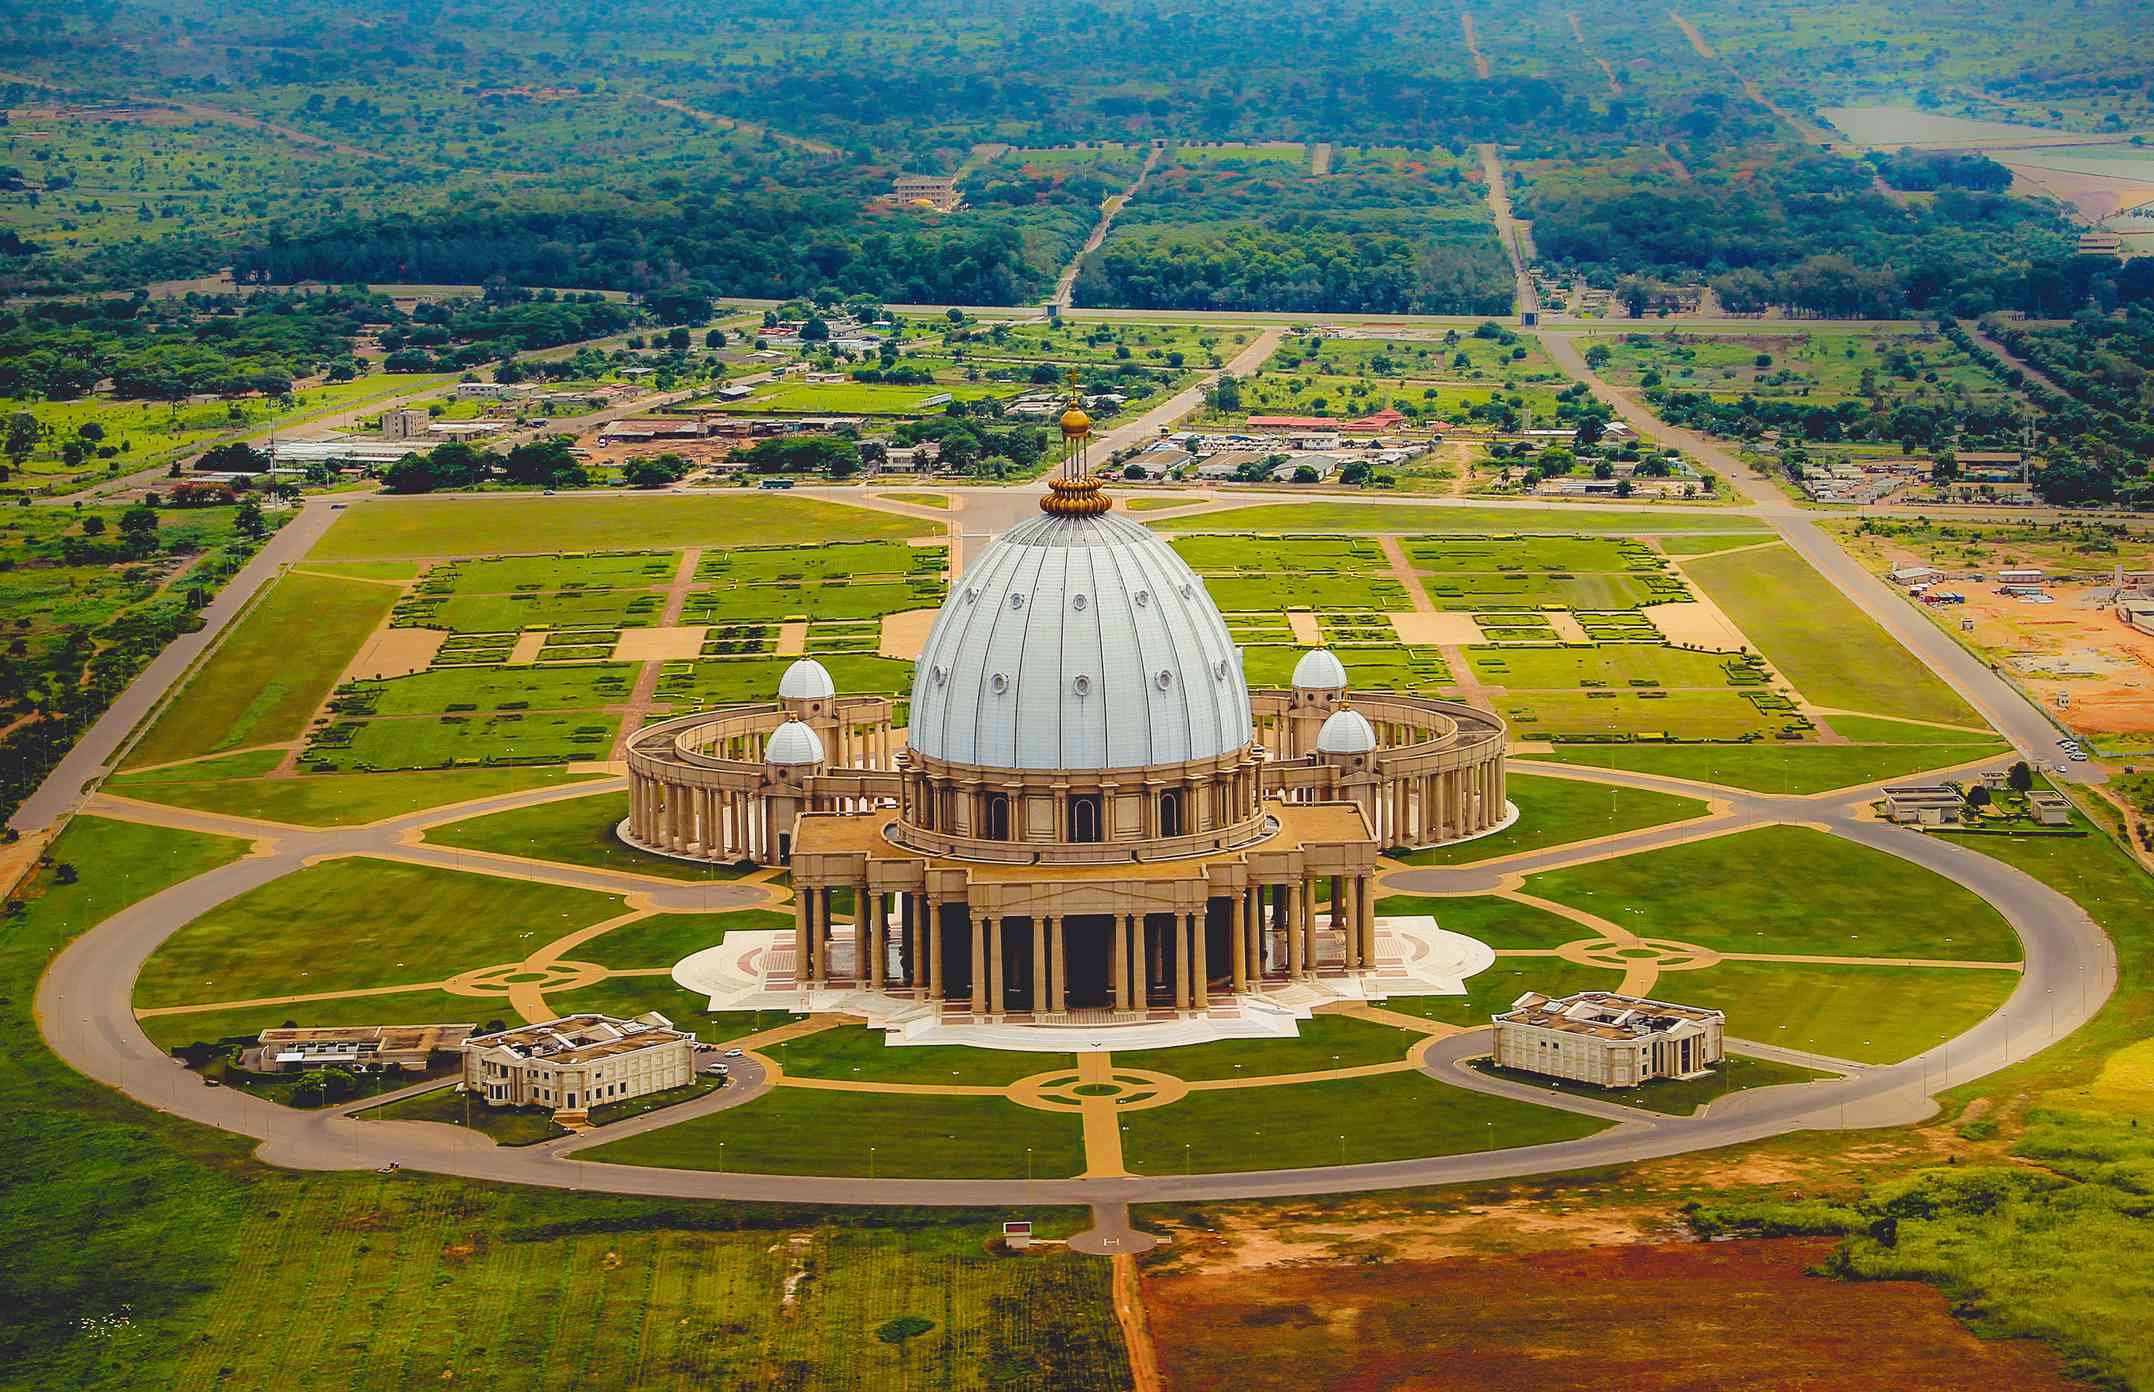 National monument of Cote d’Ivoire - The Basilica of Our Lady of Peace